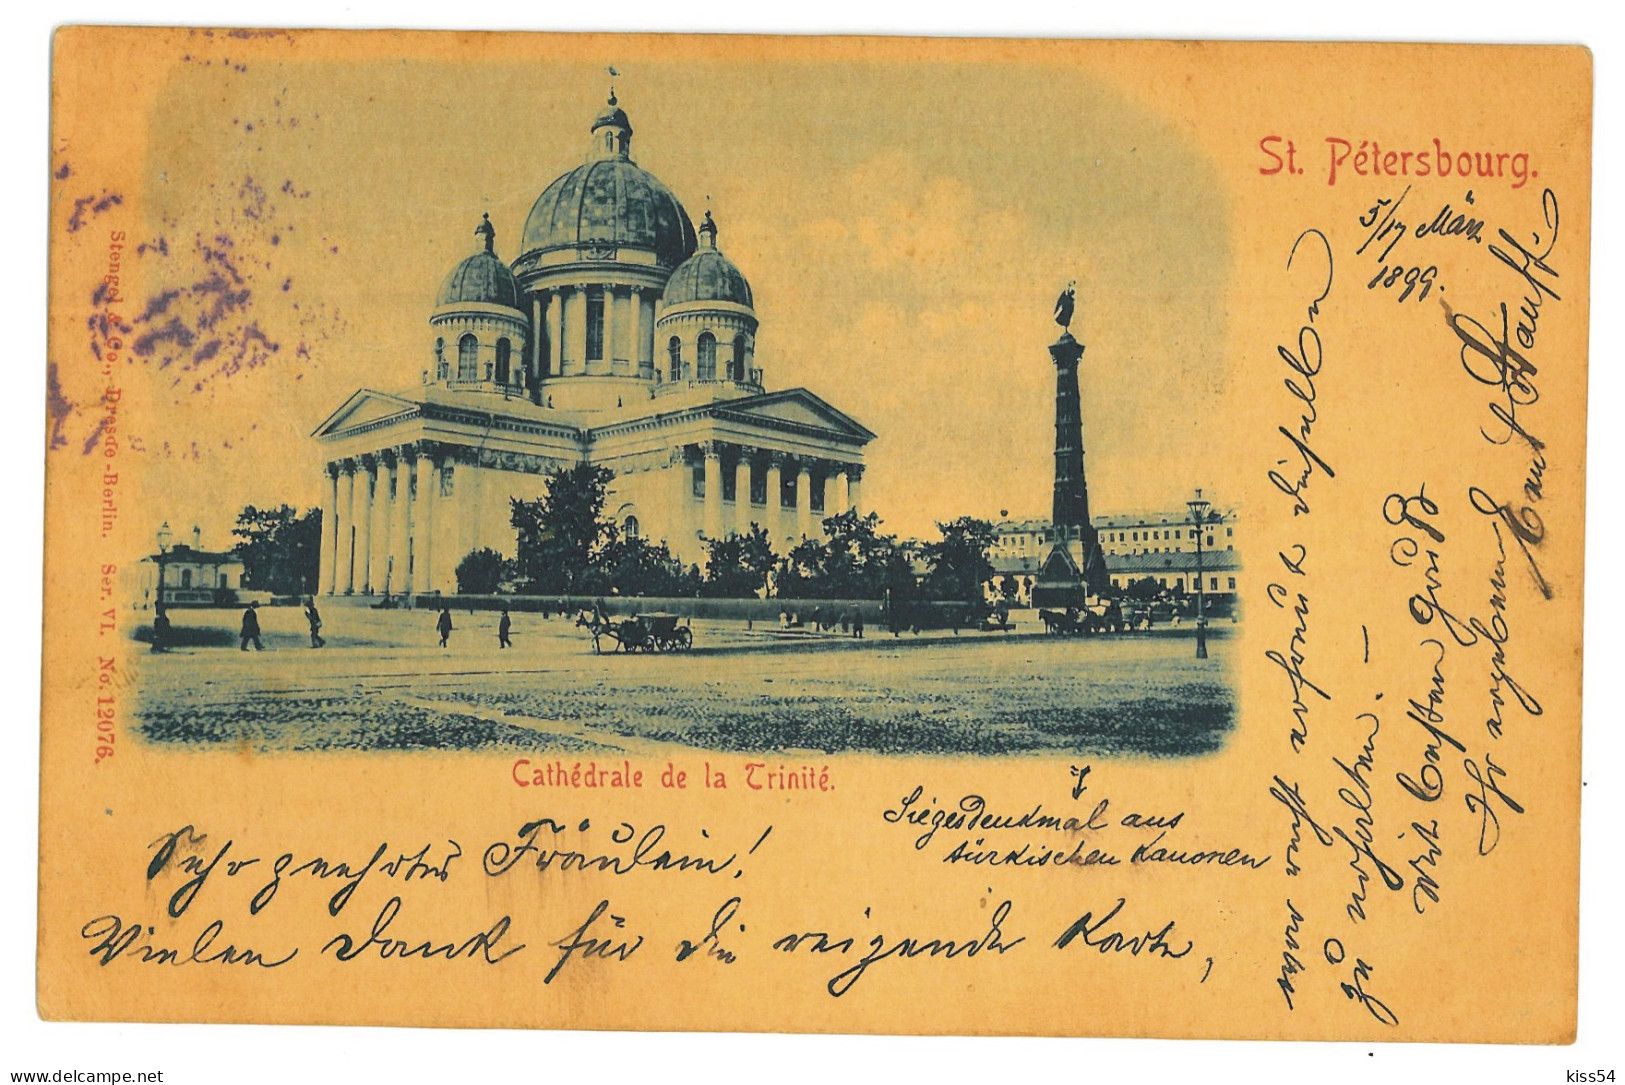 RUS 48 - 23749 SAINT PETERSBURG, Cathedral, Litho, Russia - Old Postcard - Used - 1899 - Russie